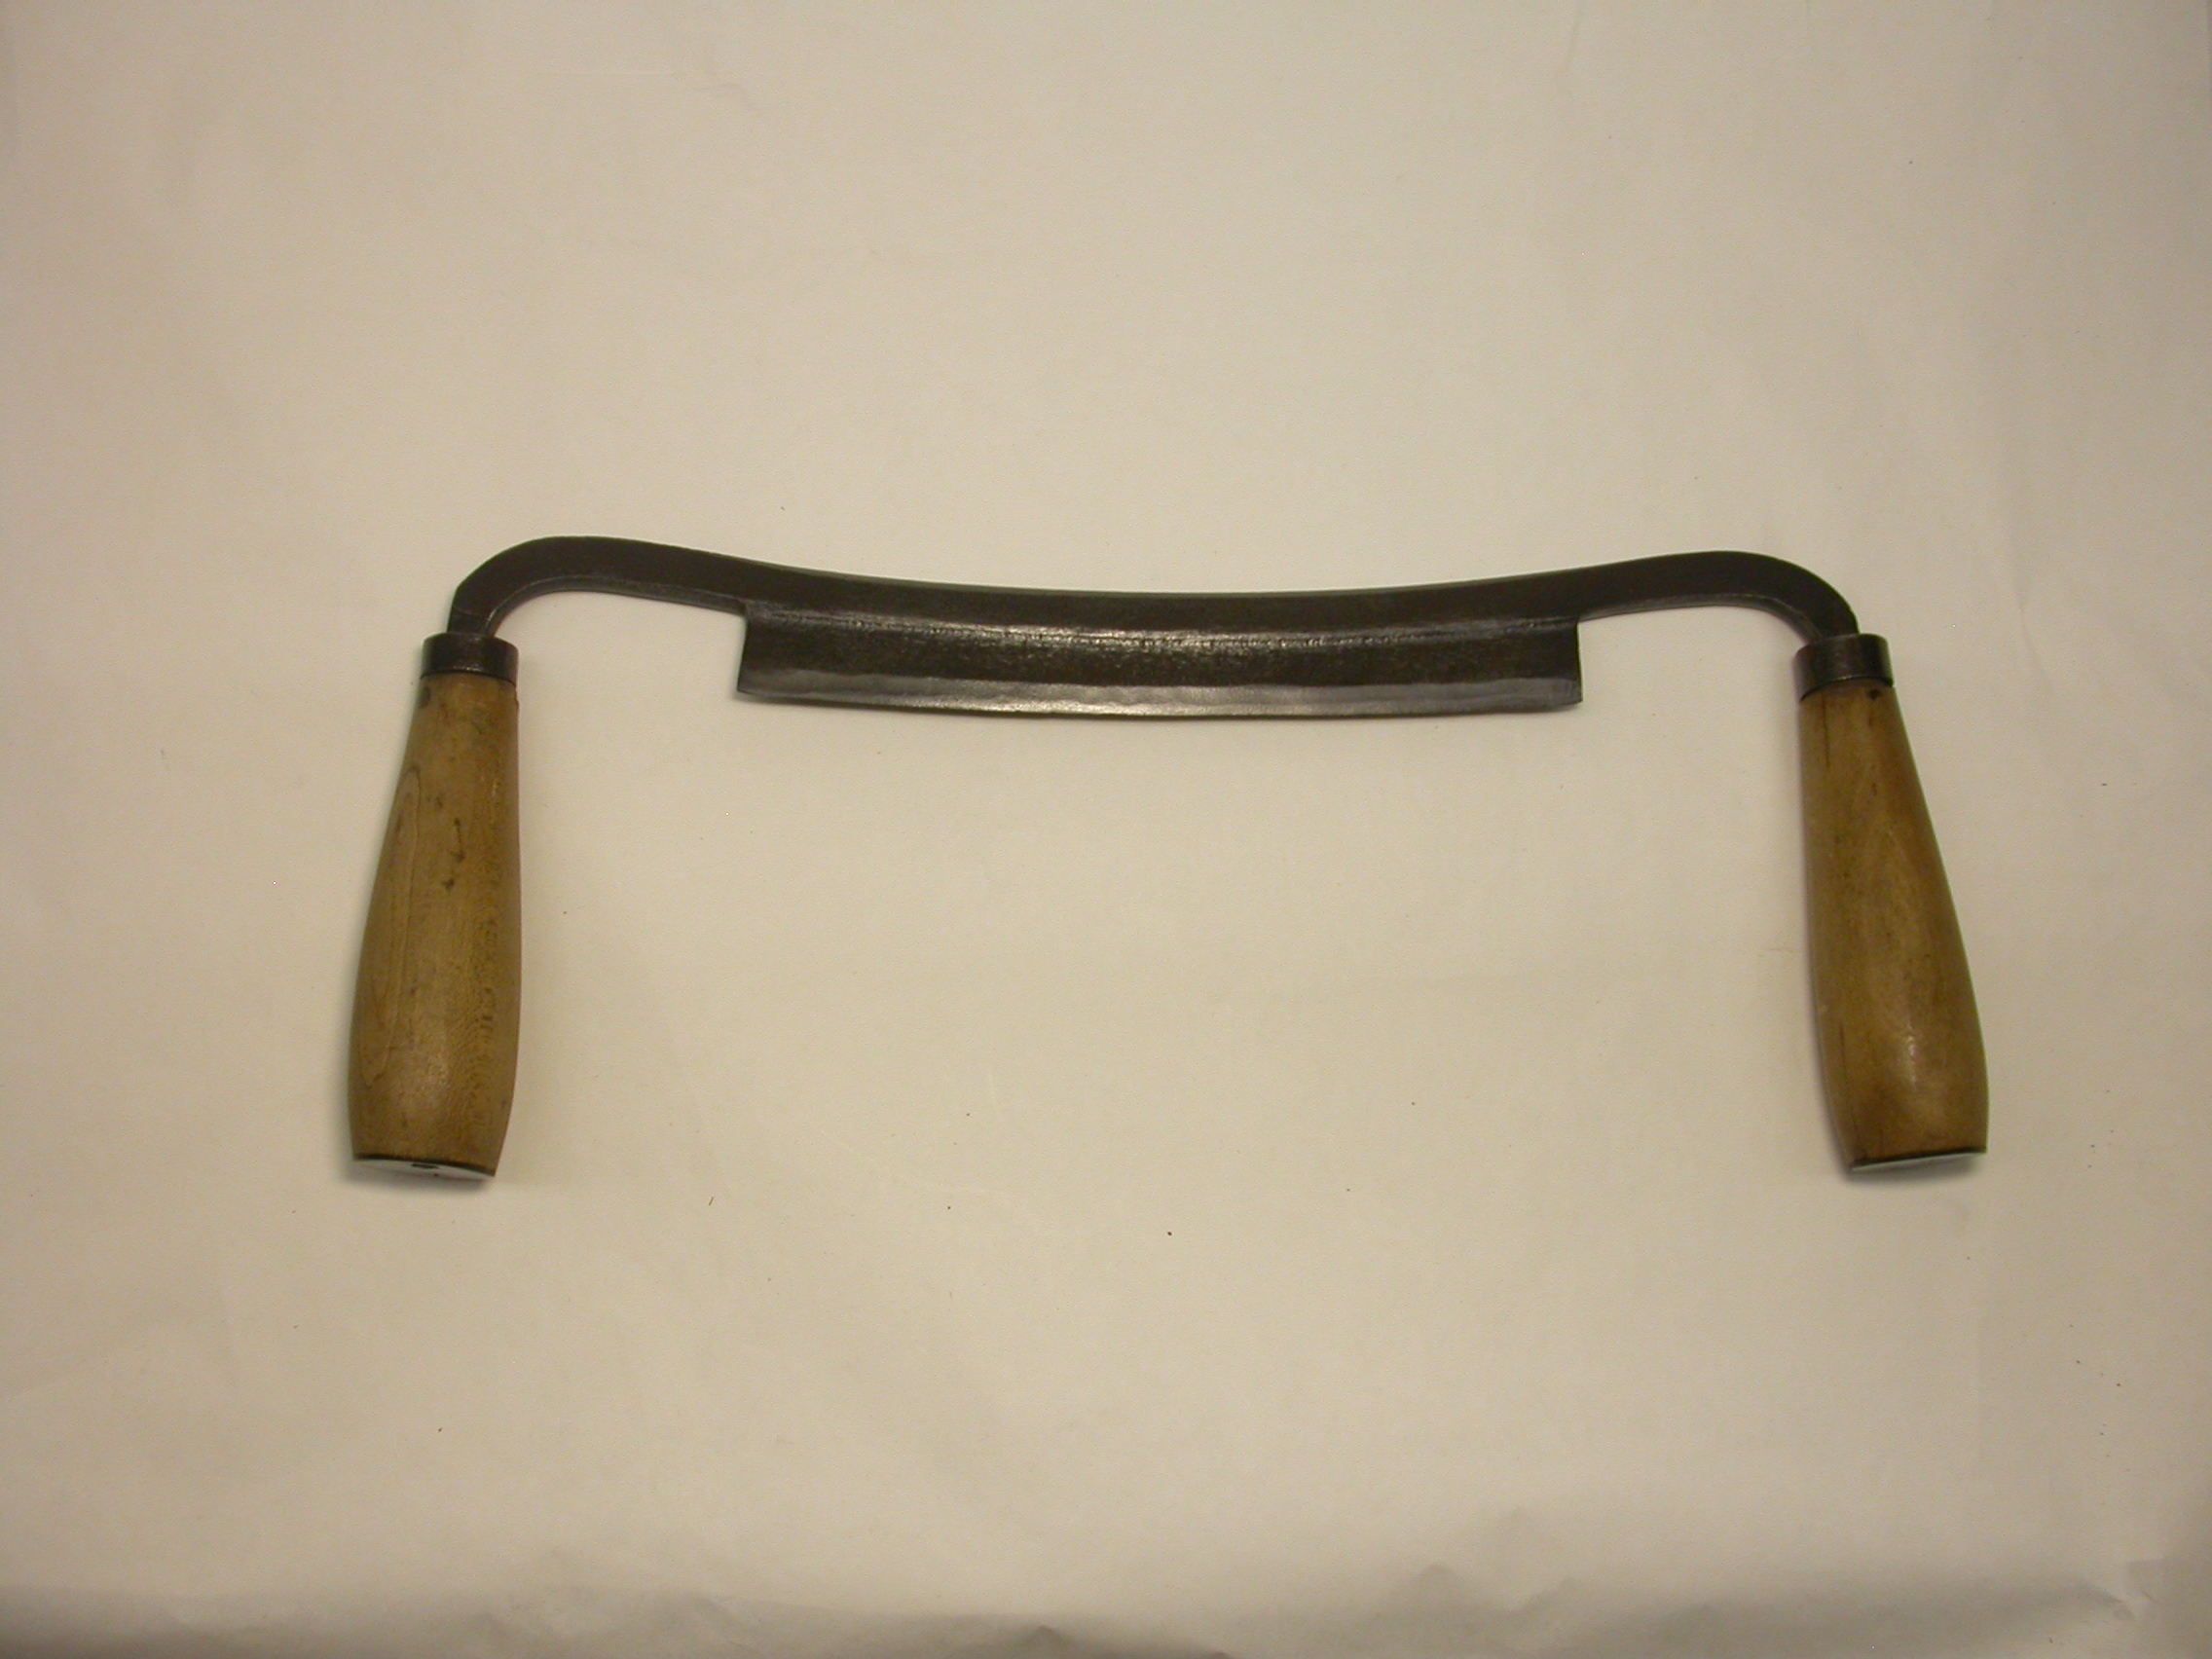 drawknife%20with%20two%20wooden%20handles%20at%20each%20end